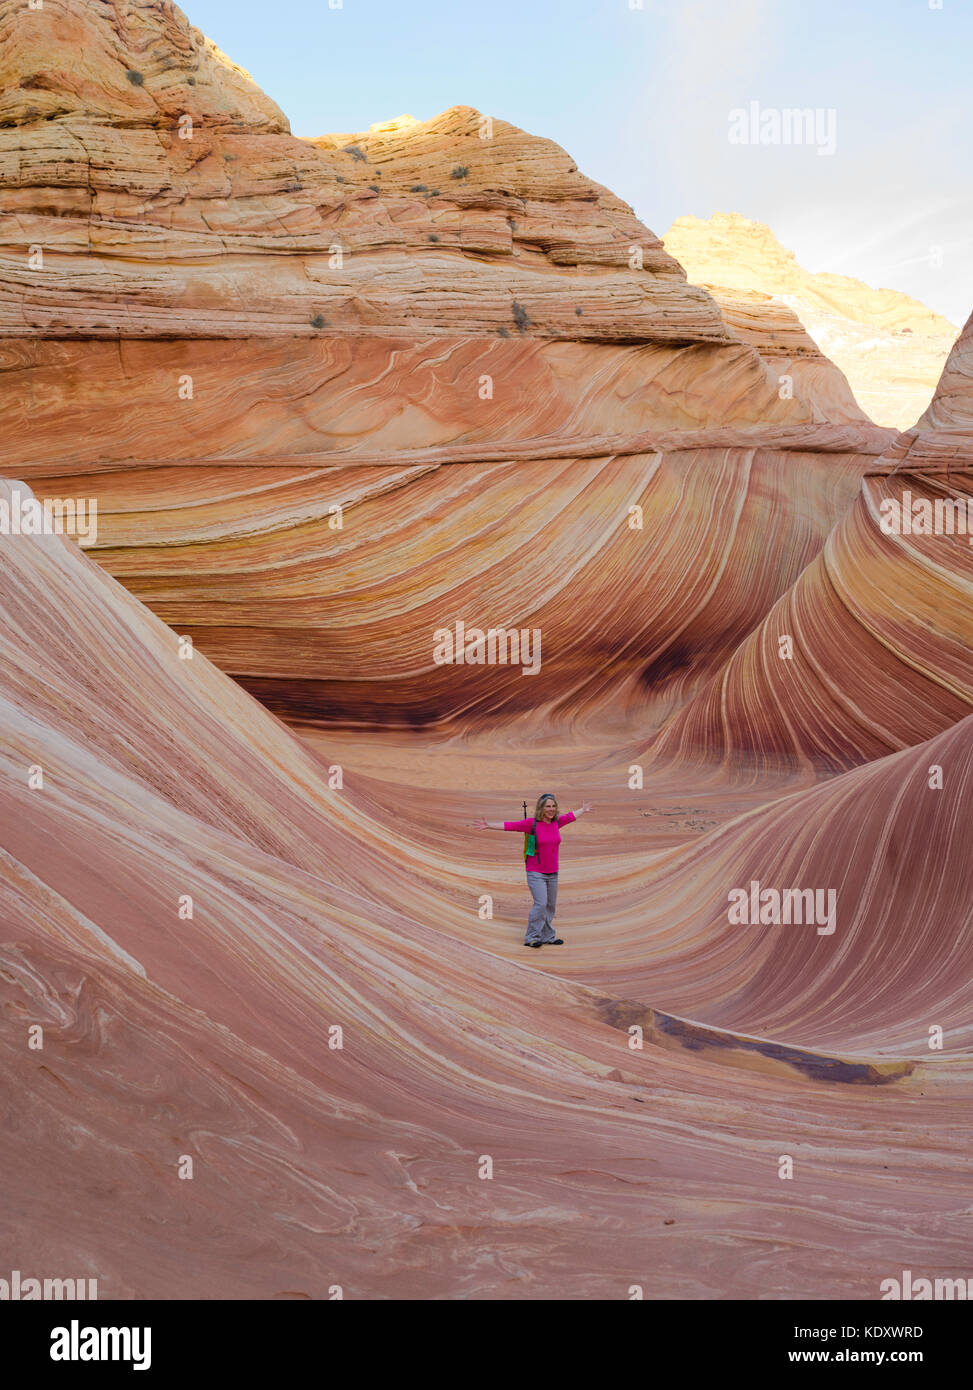 Scene from the beautiful geological formation of colorful folded sandstone known as "The Wave." North Coyote Buttes, Vermillion Cliffs National Monume Stock Photo